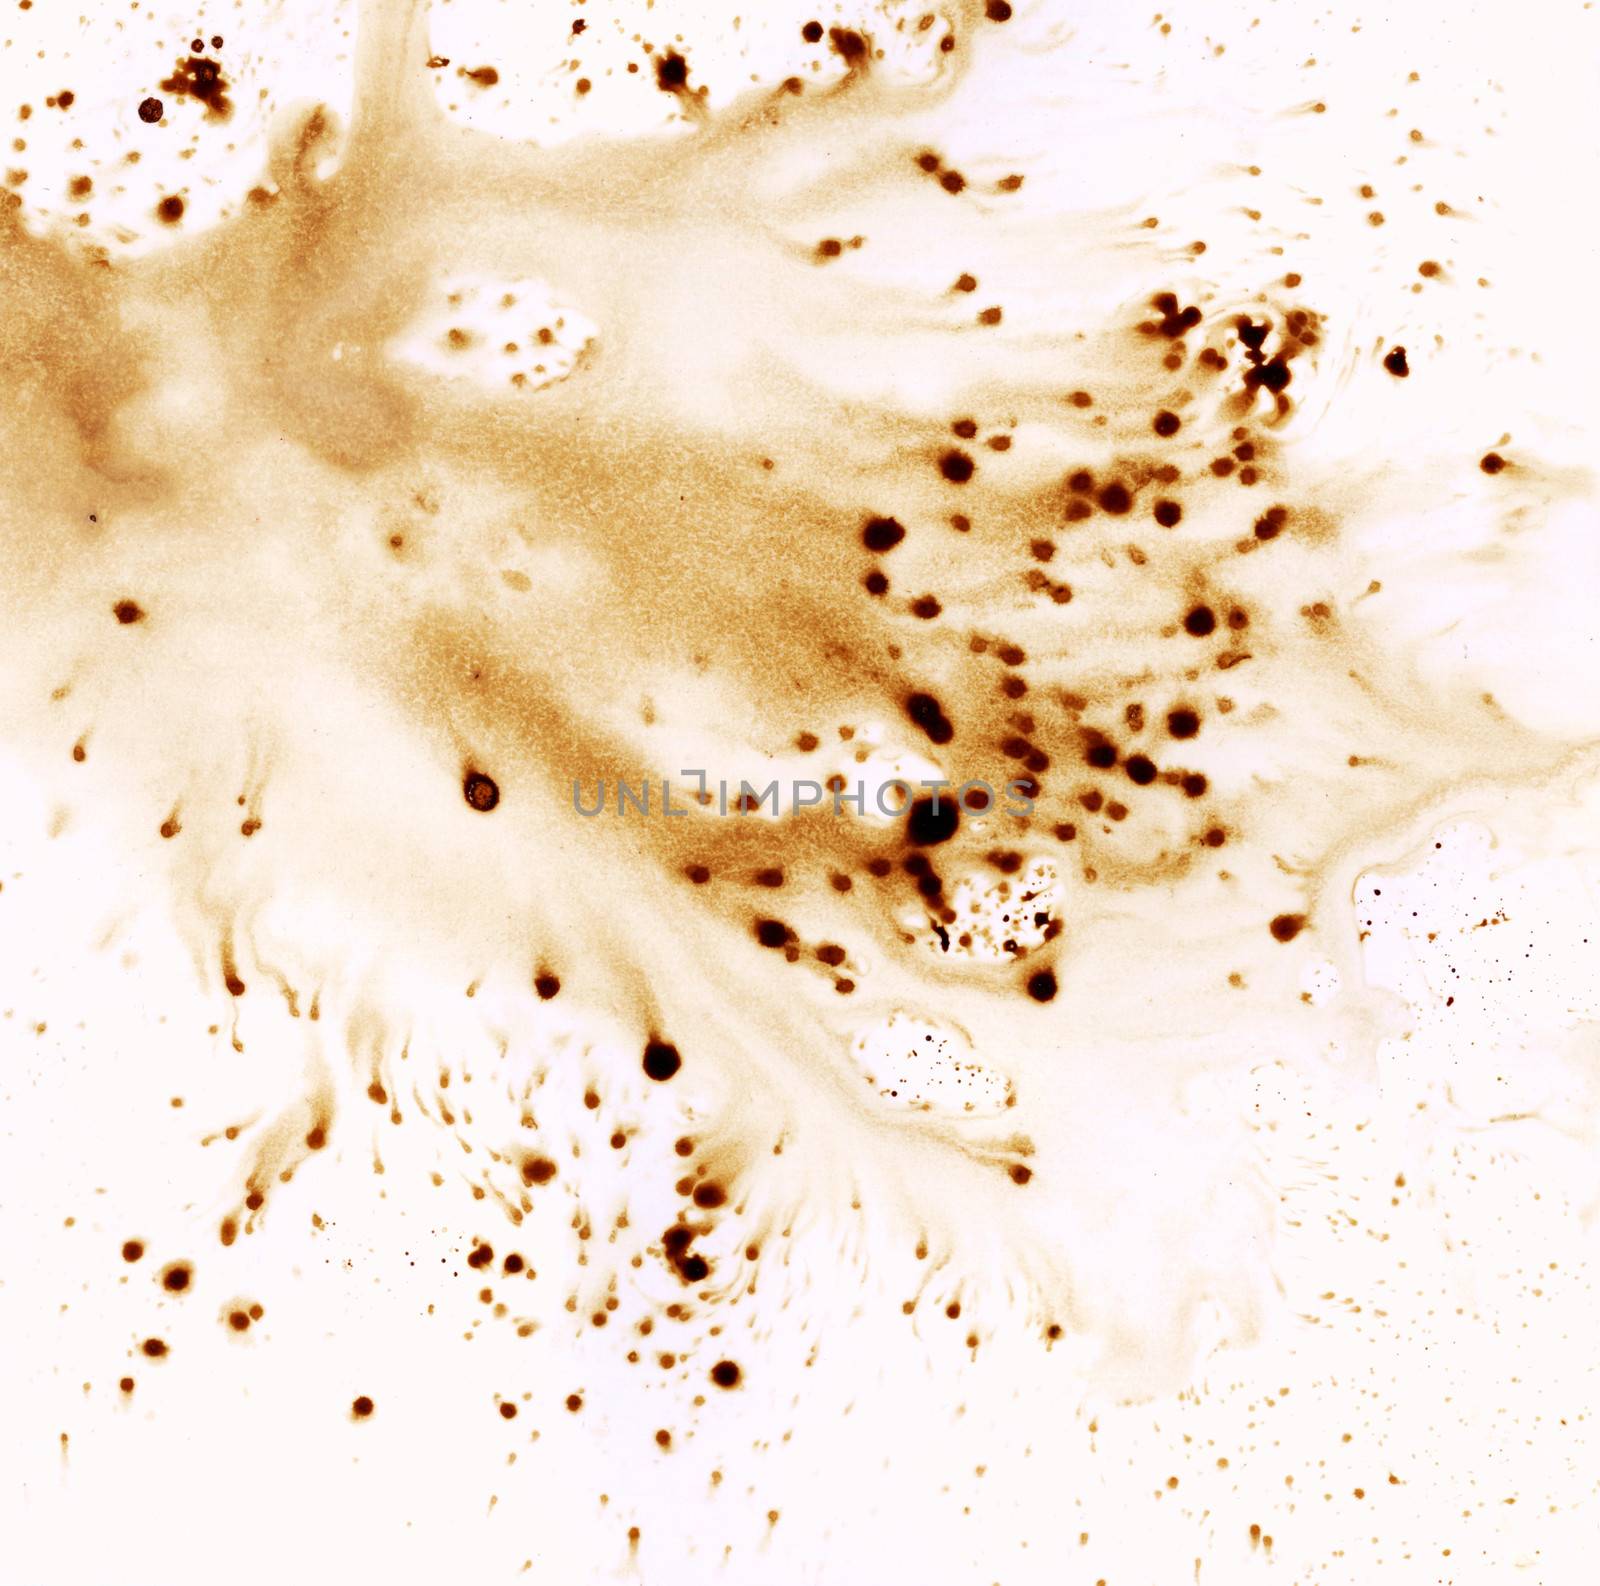 Abstract background, brown coffee stains on paper